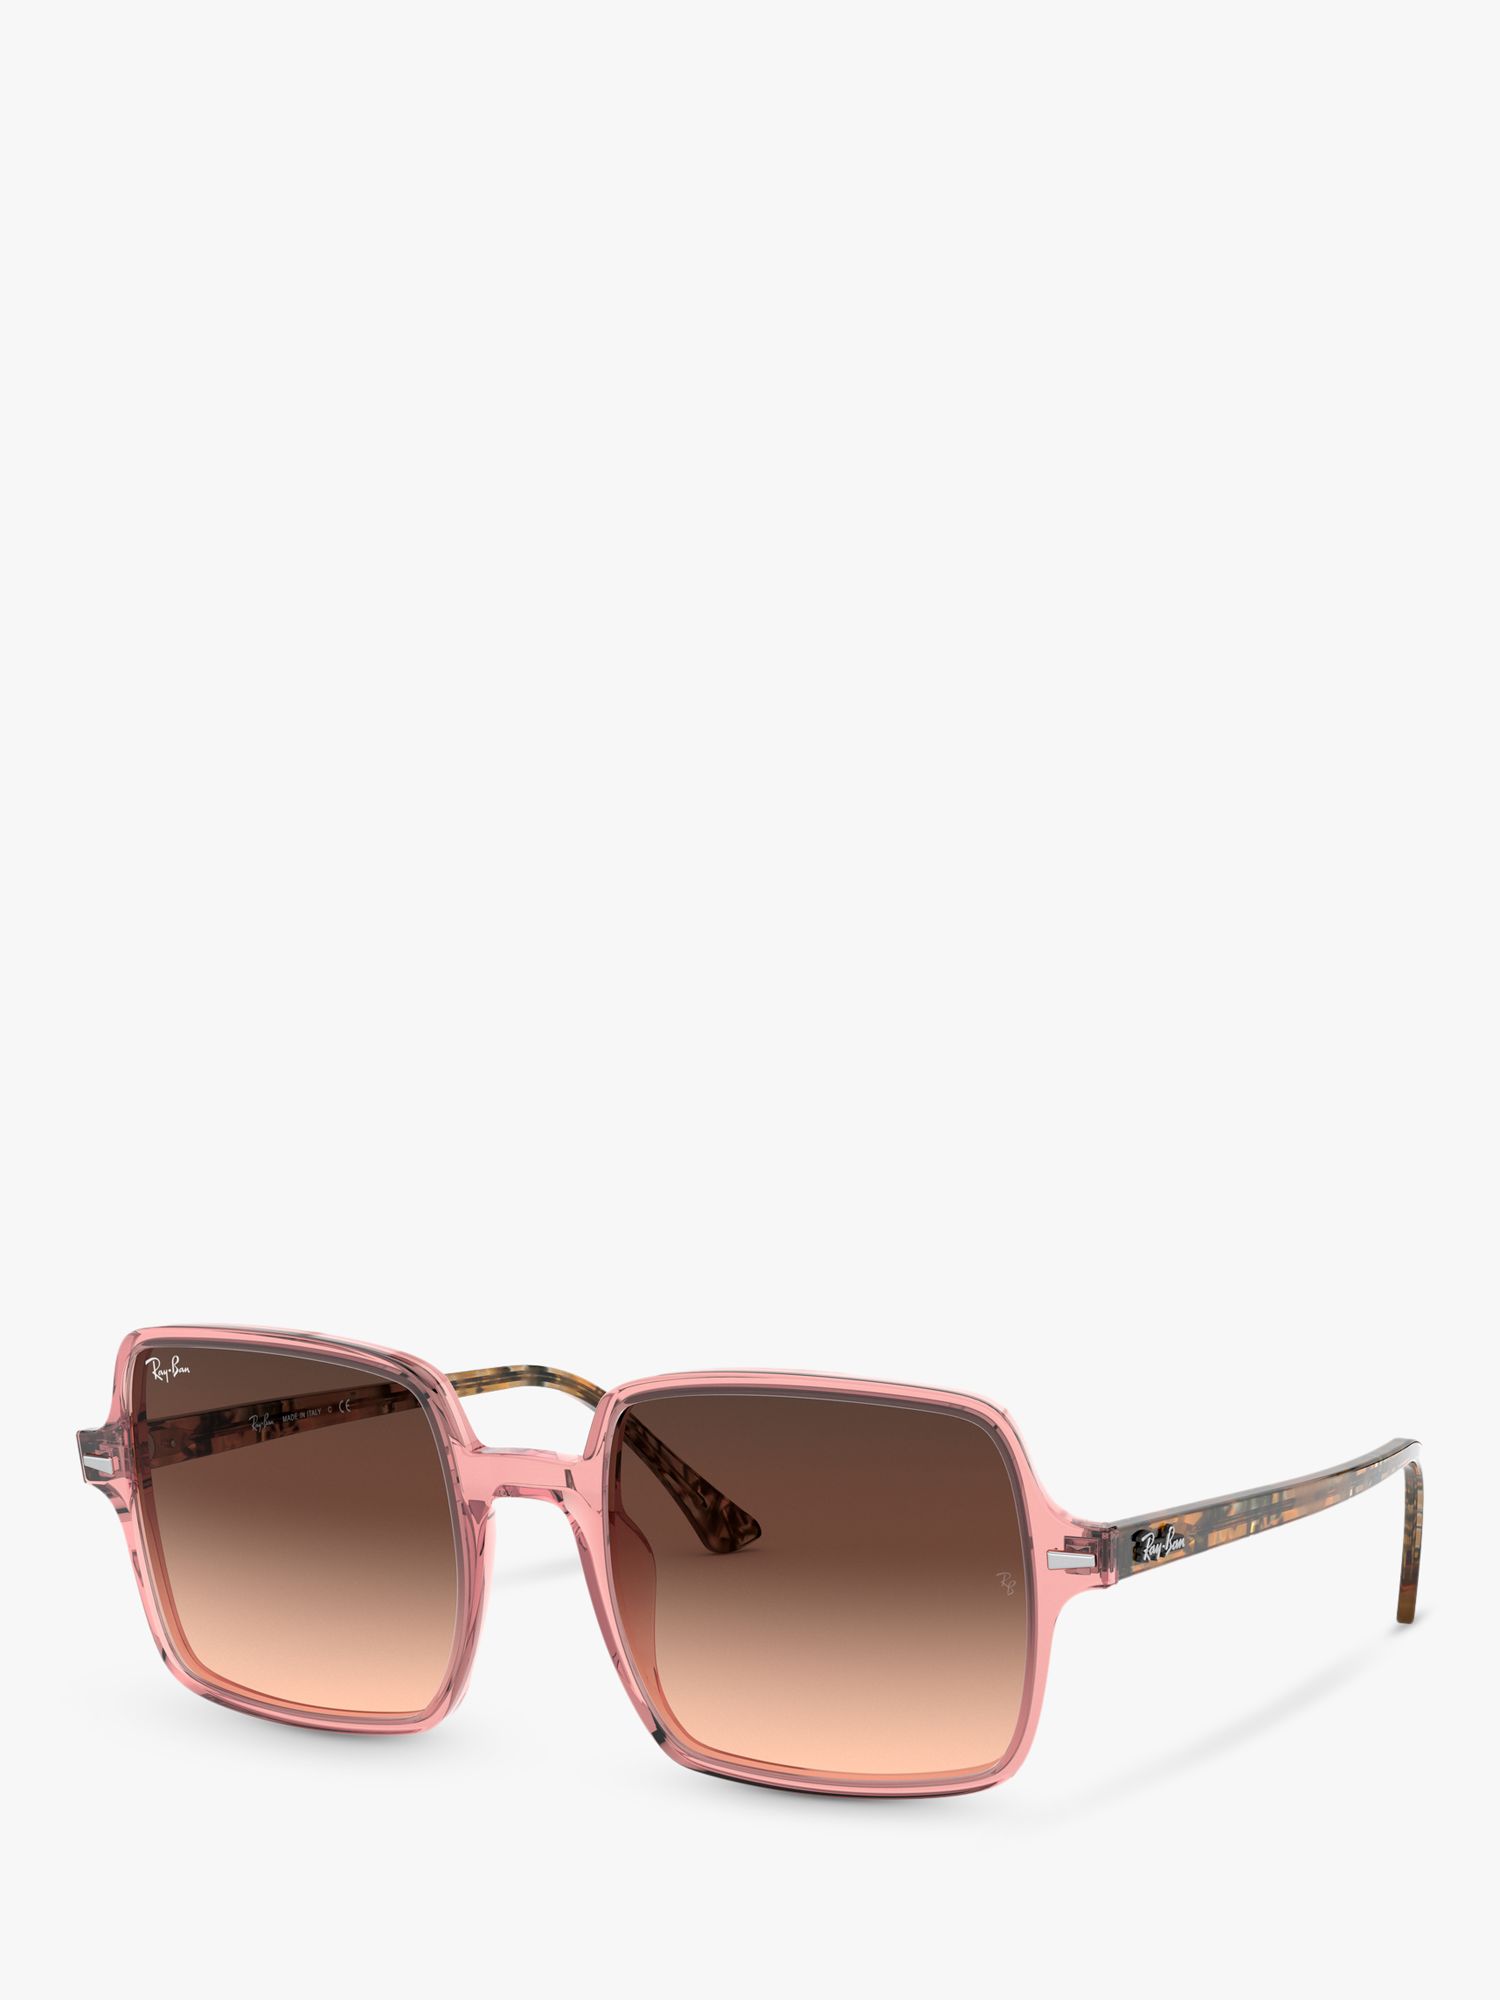 women's square ray bans